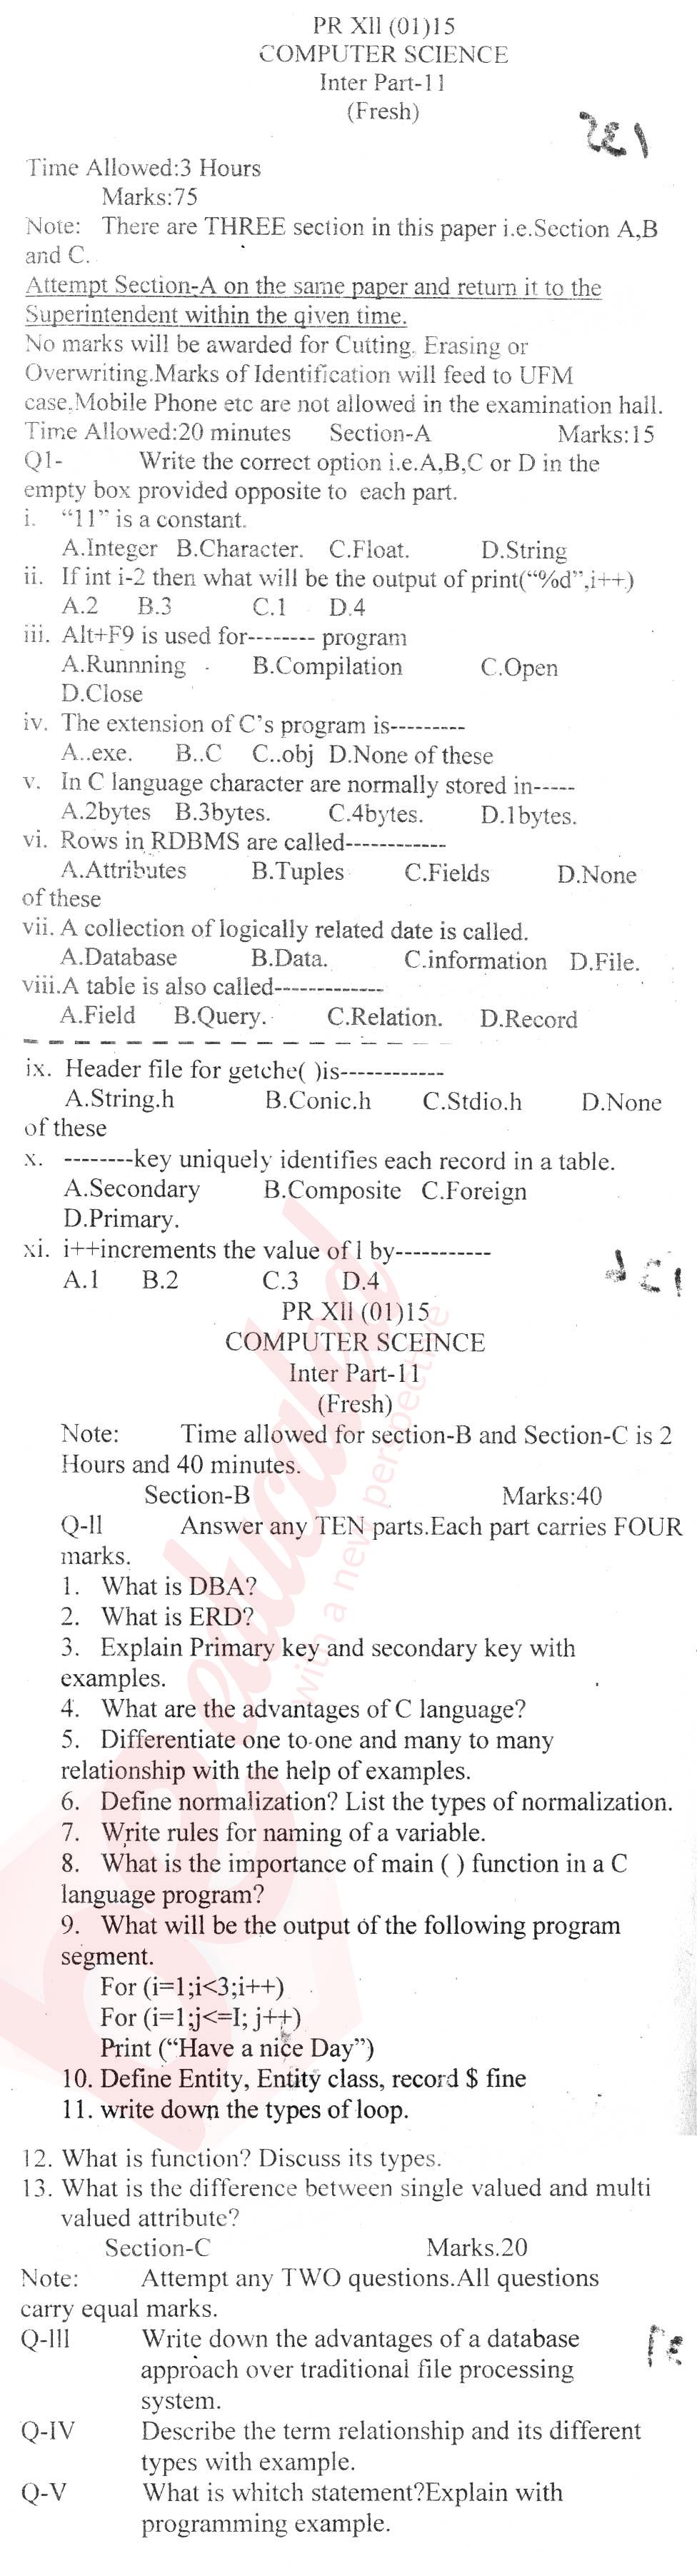 Computer Science ICS Part 2 Past Paper Group 1 BISE Malakand 2015